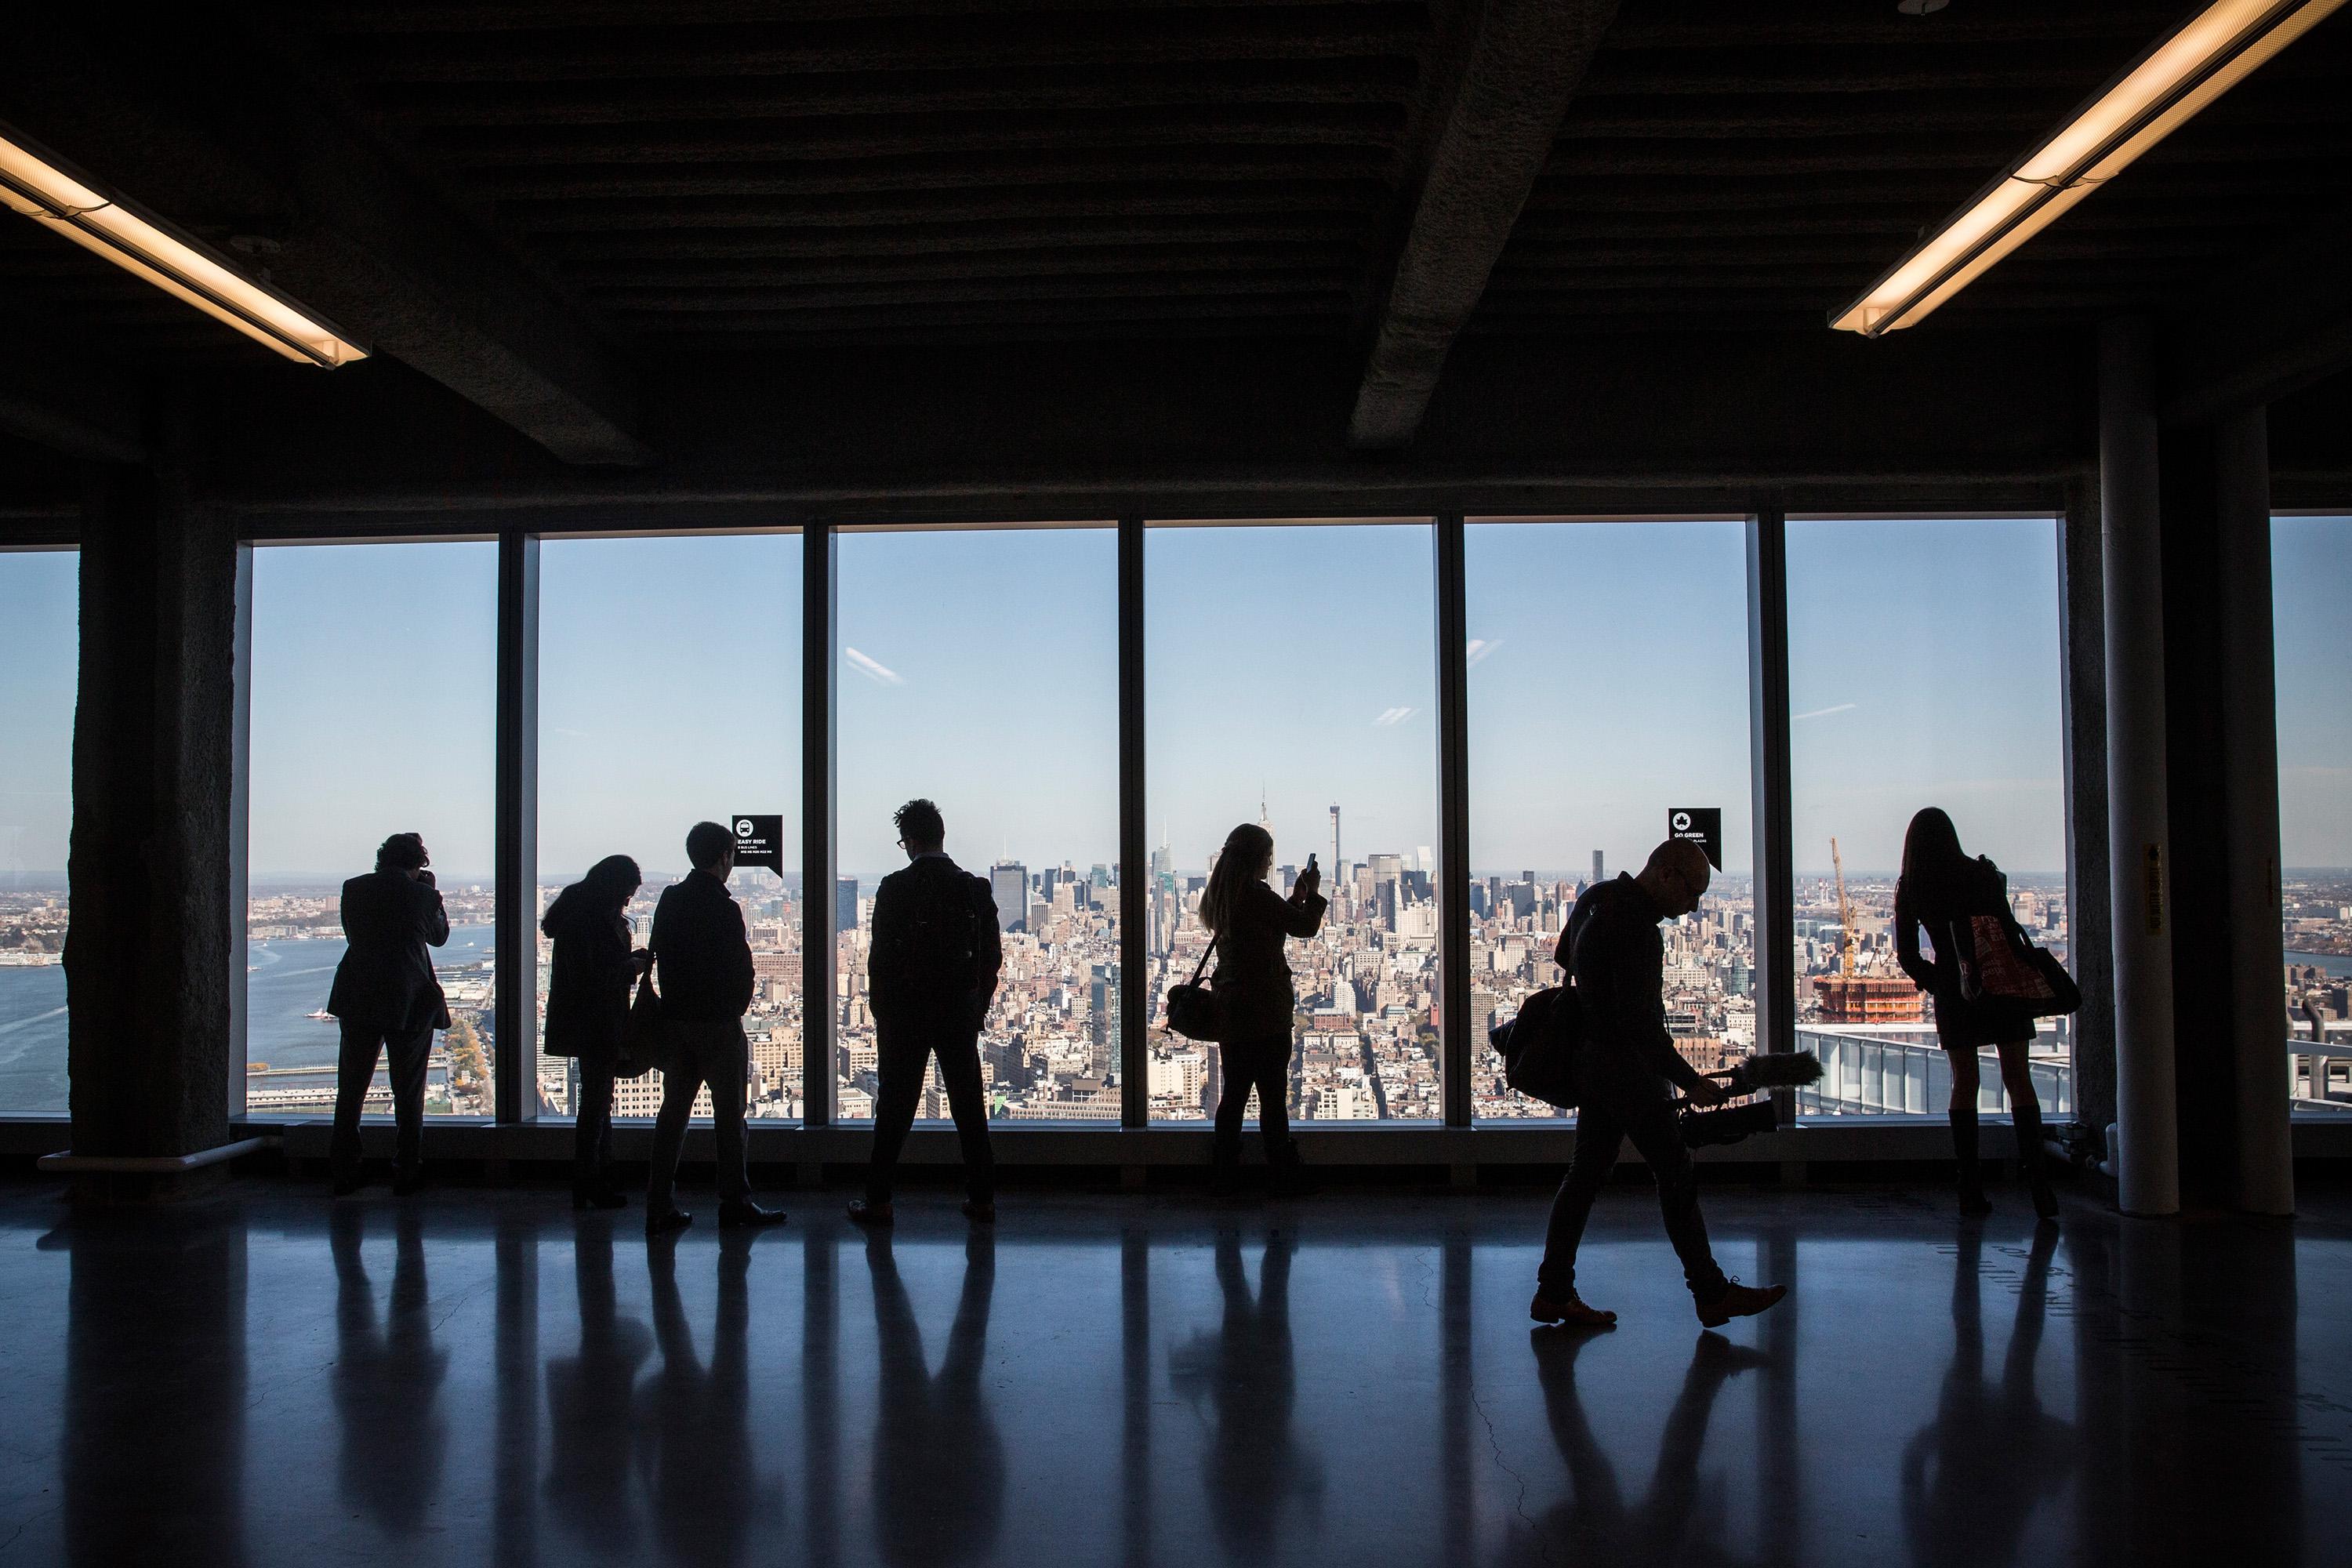 Members of the media explore a model office, used to exhibit what a business space could look like on the 63rd floor of  One World Trade Center, which opens for business today, on November 3, 2014 in New York City.